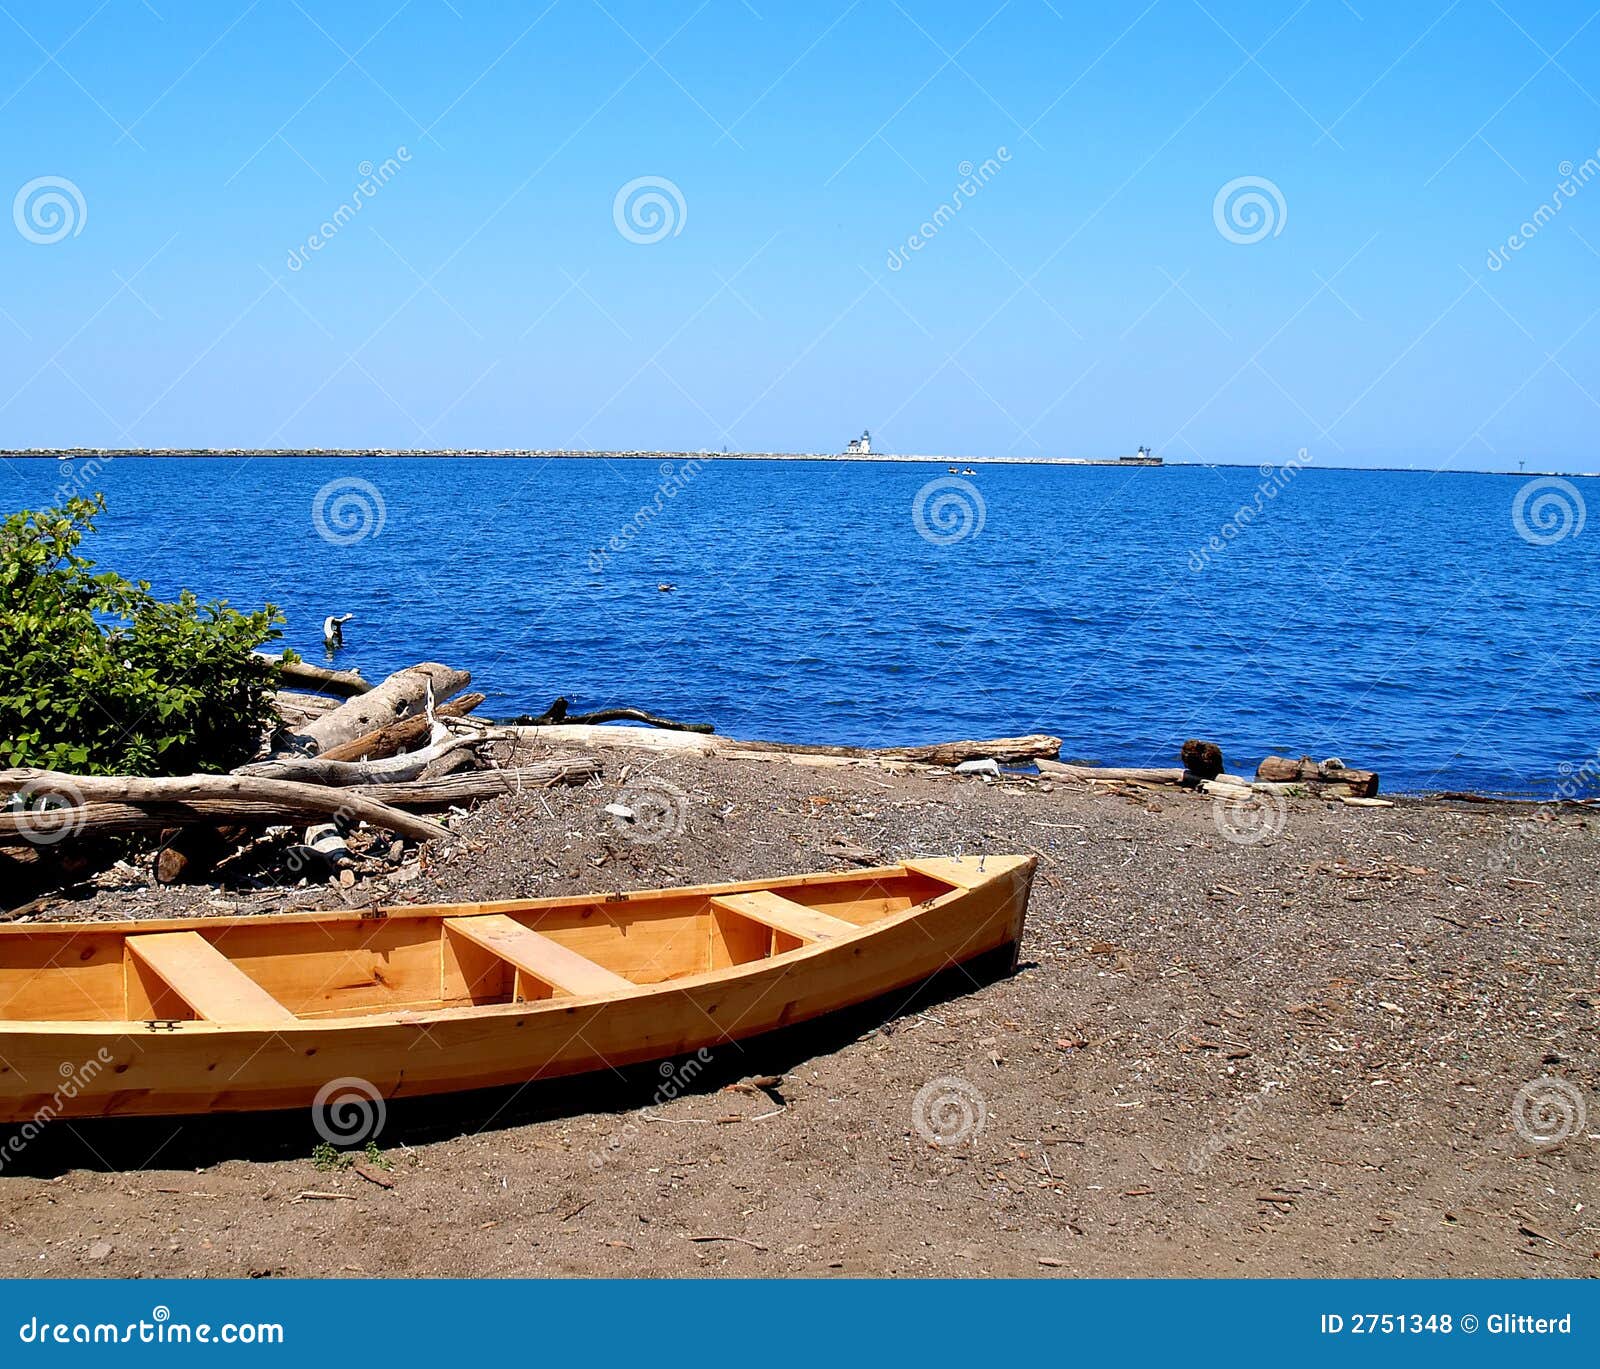 wooden boat on lake erie